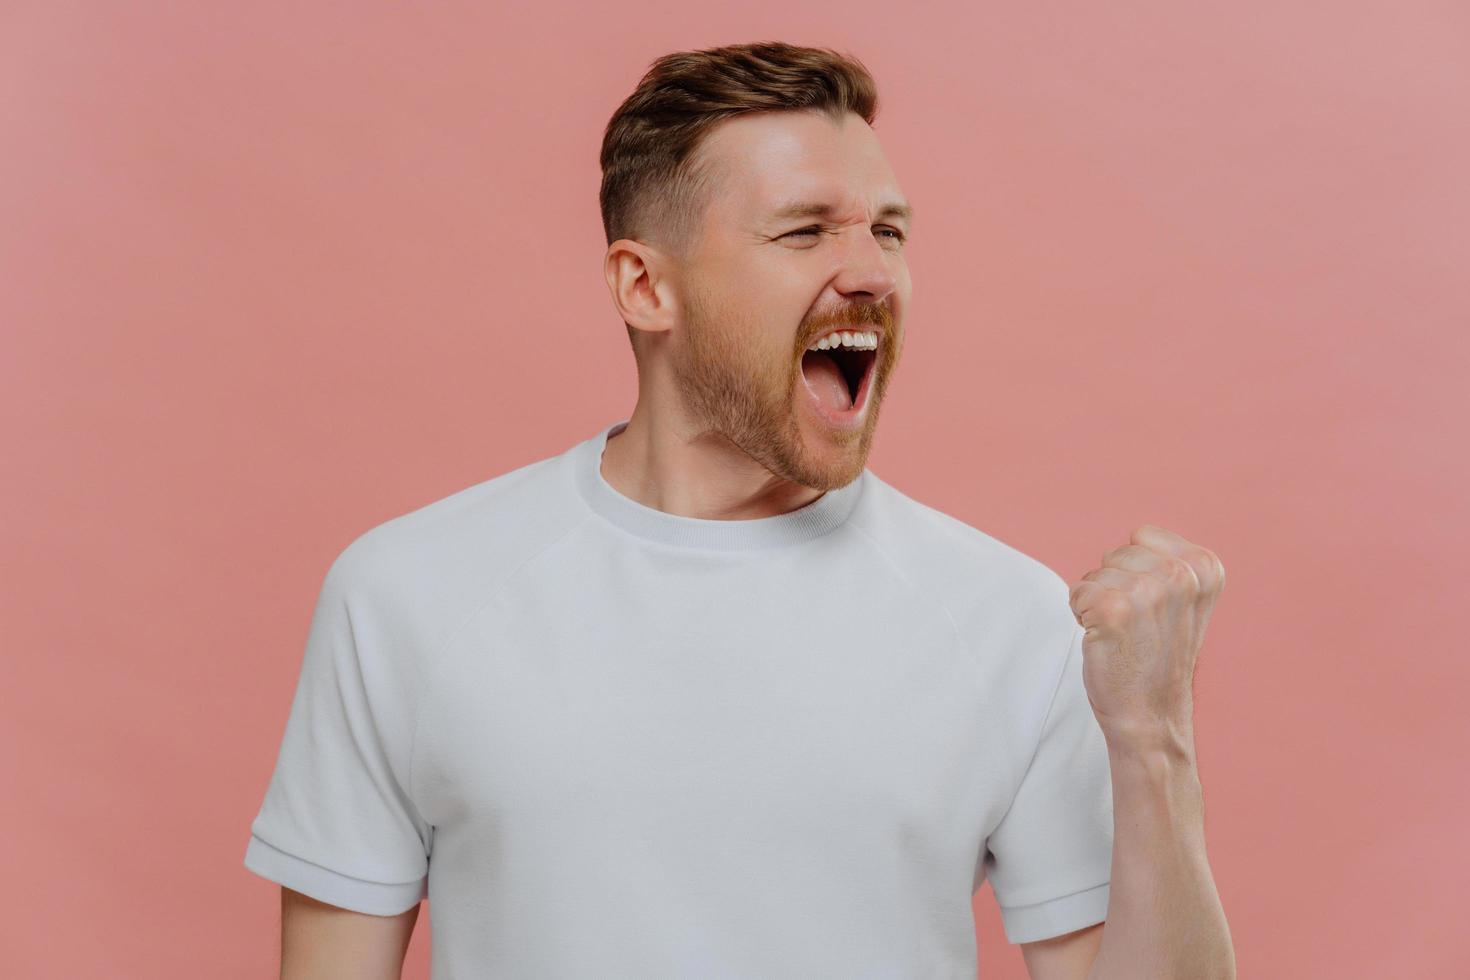 Emotional successful man shouts from joy clenches fist with triumph makes pump gesture cellebrates triumph dressed in casual white t shirt isolated over pink background. Body language concept photo